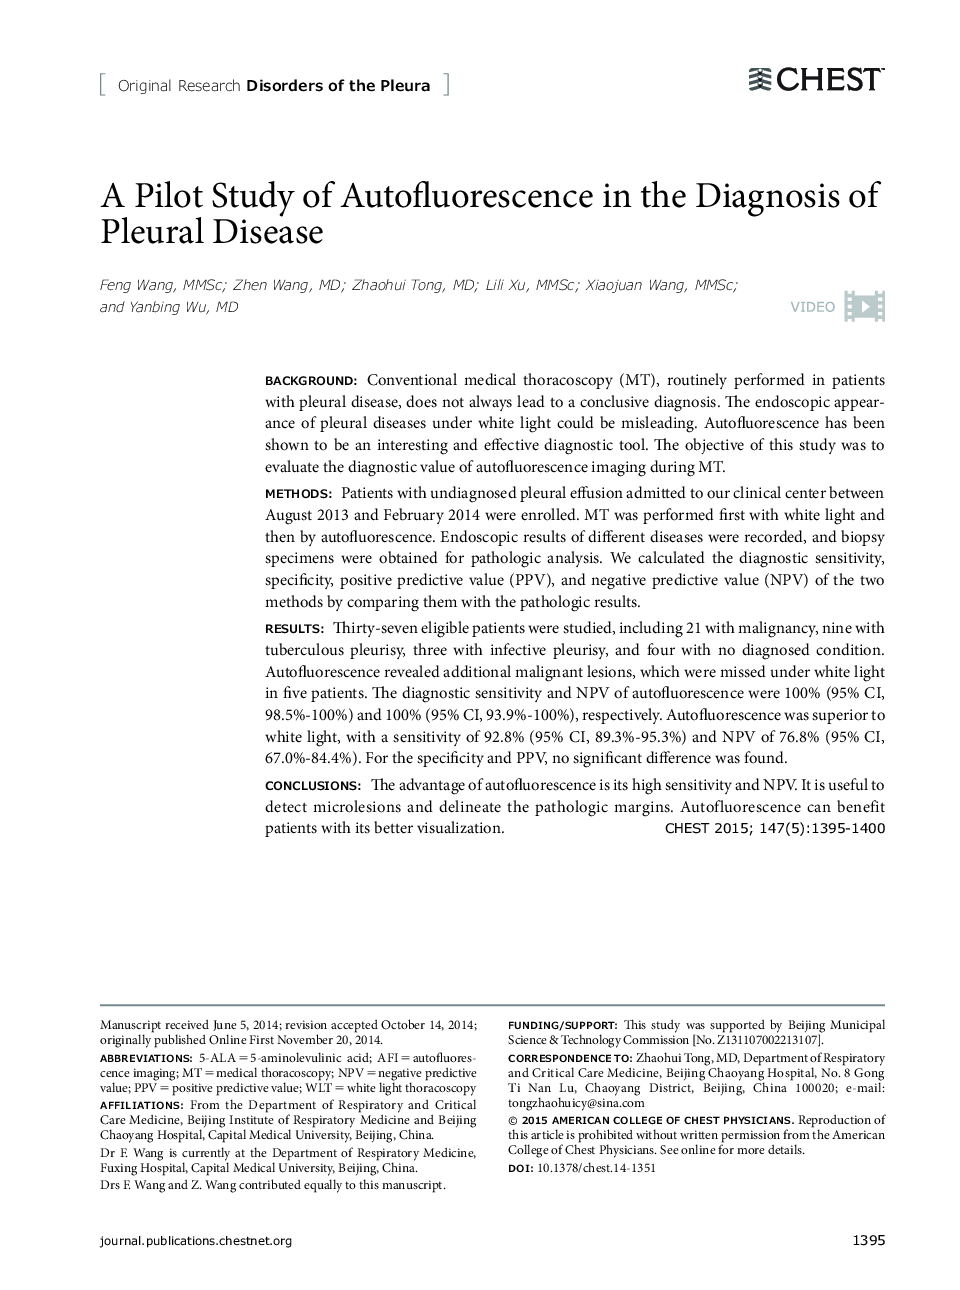 A Pilot Study of Autofluorescence in the Diagnosis of Pleural Disease